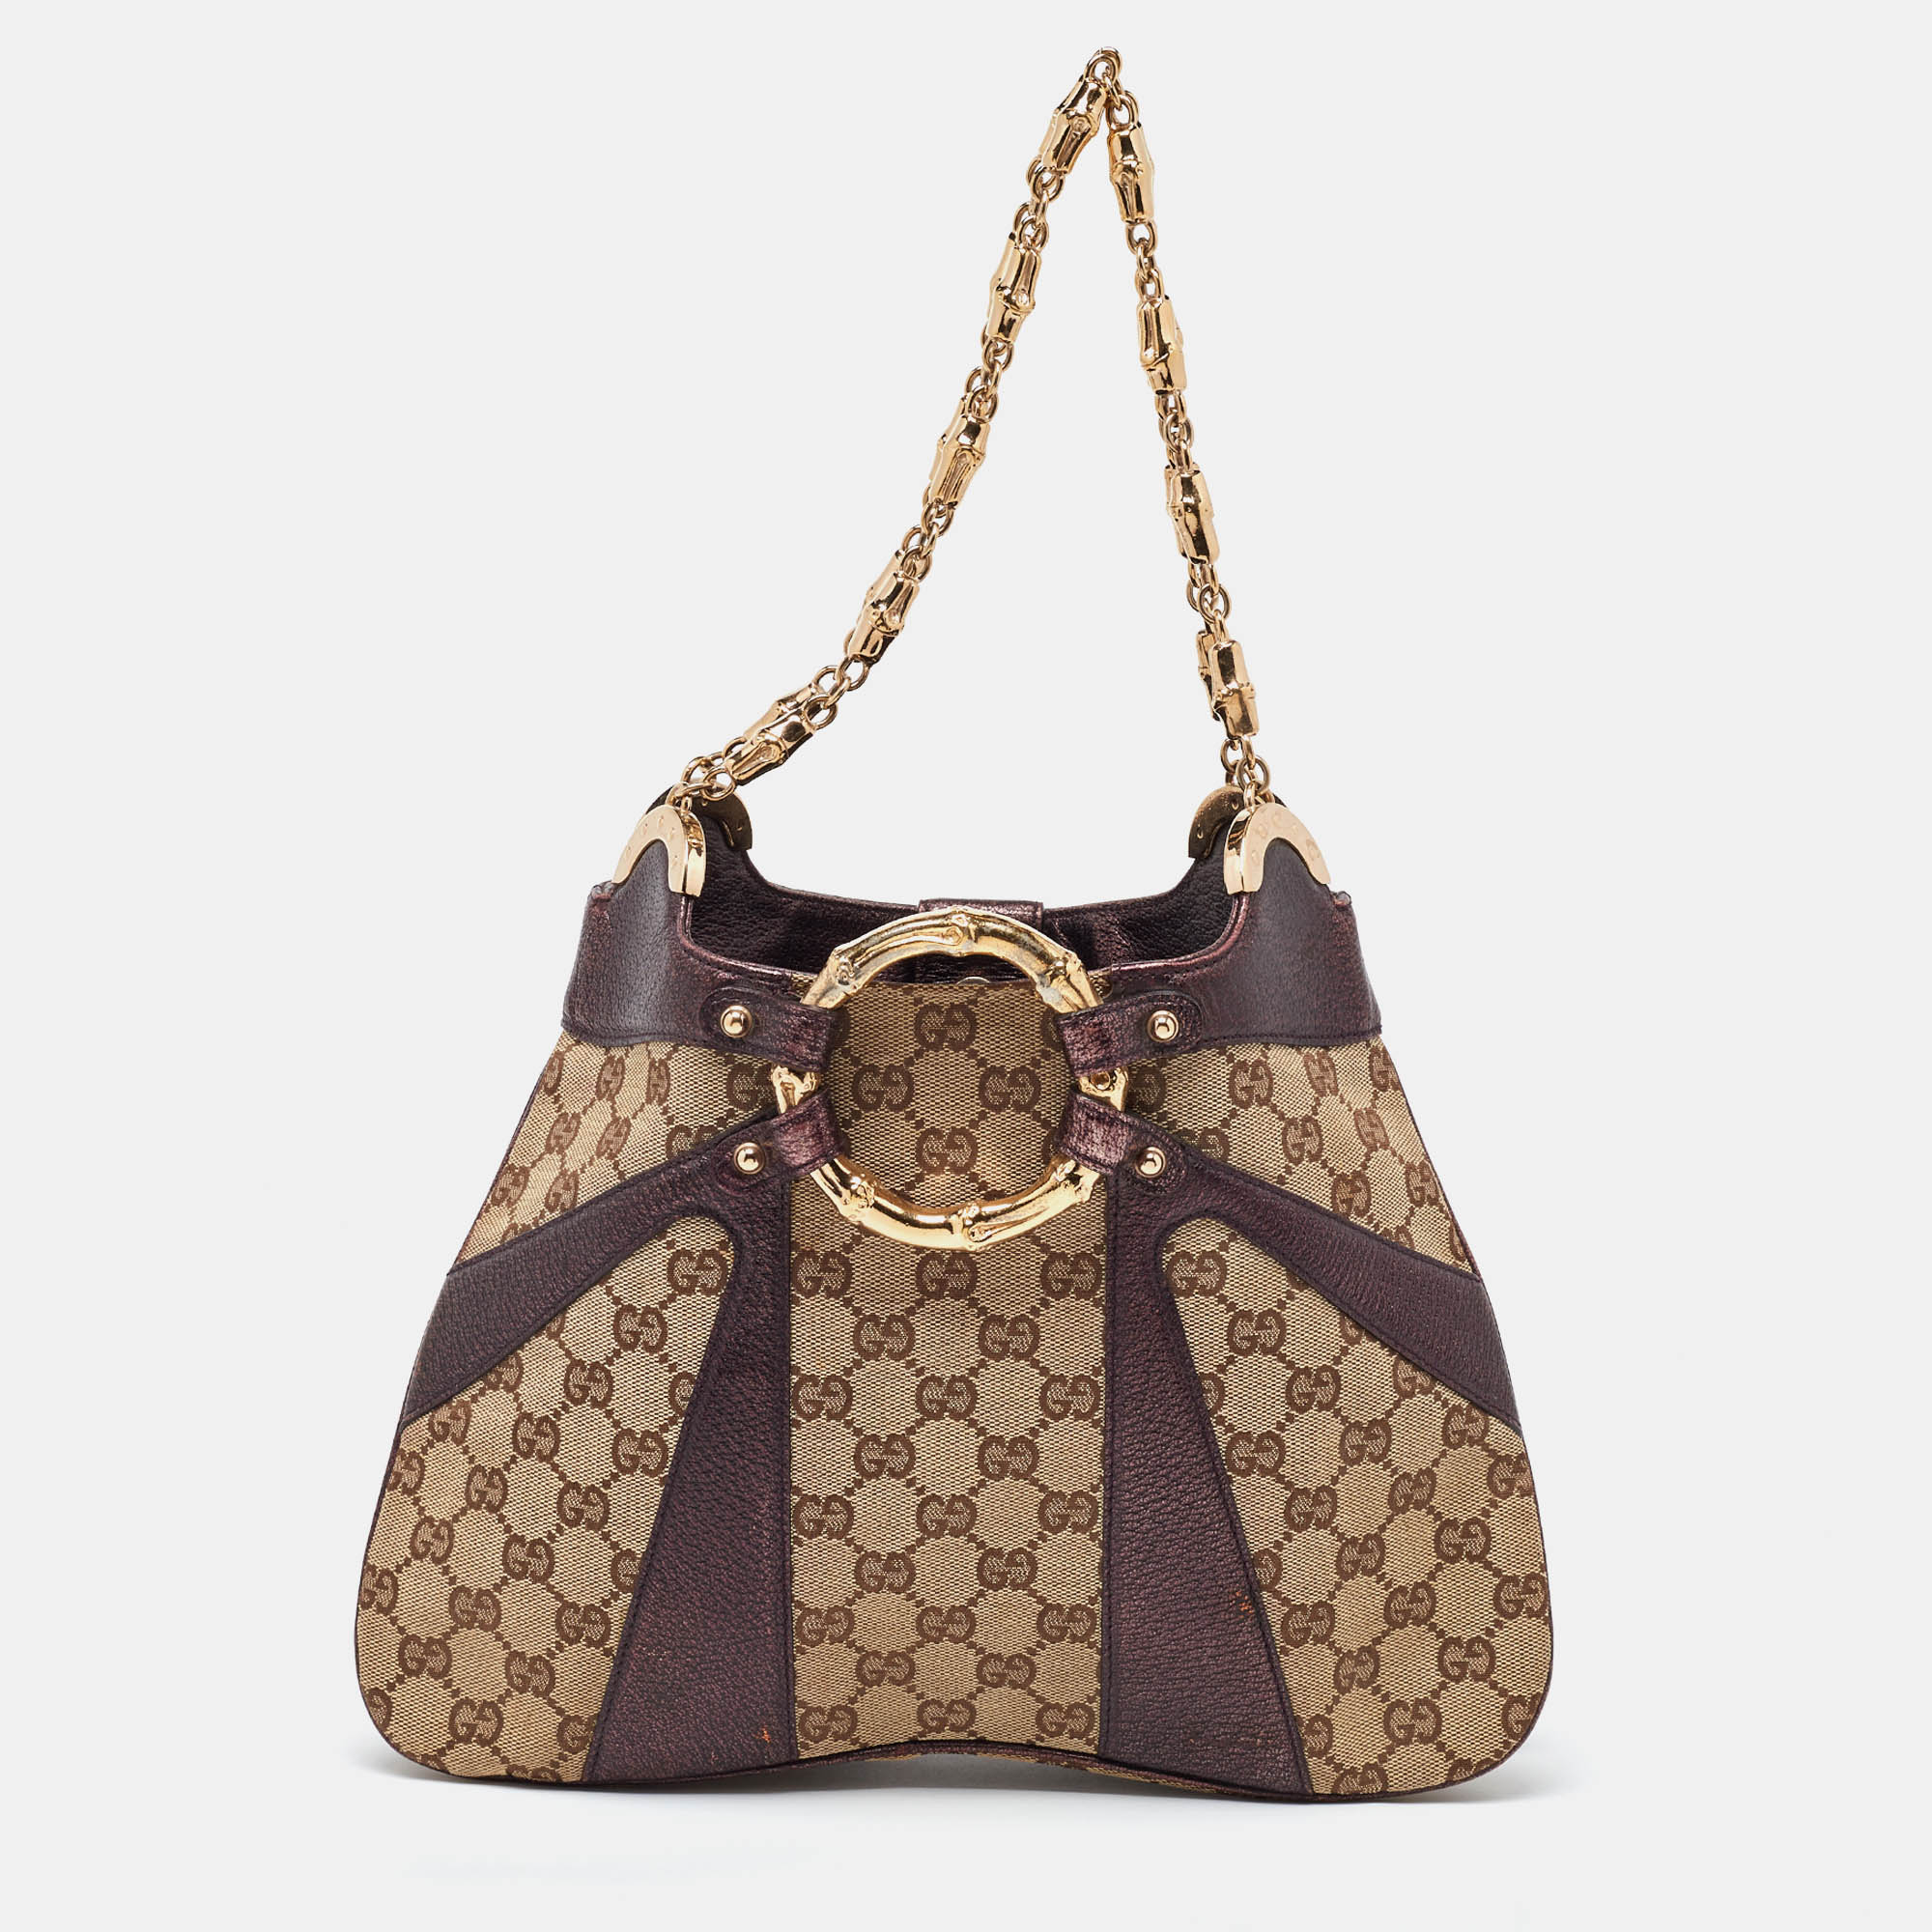 

Gucci Beige/Metallic GG Canvas and Leather Limited Edition Tom Ford Bamboo Hobo